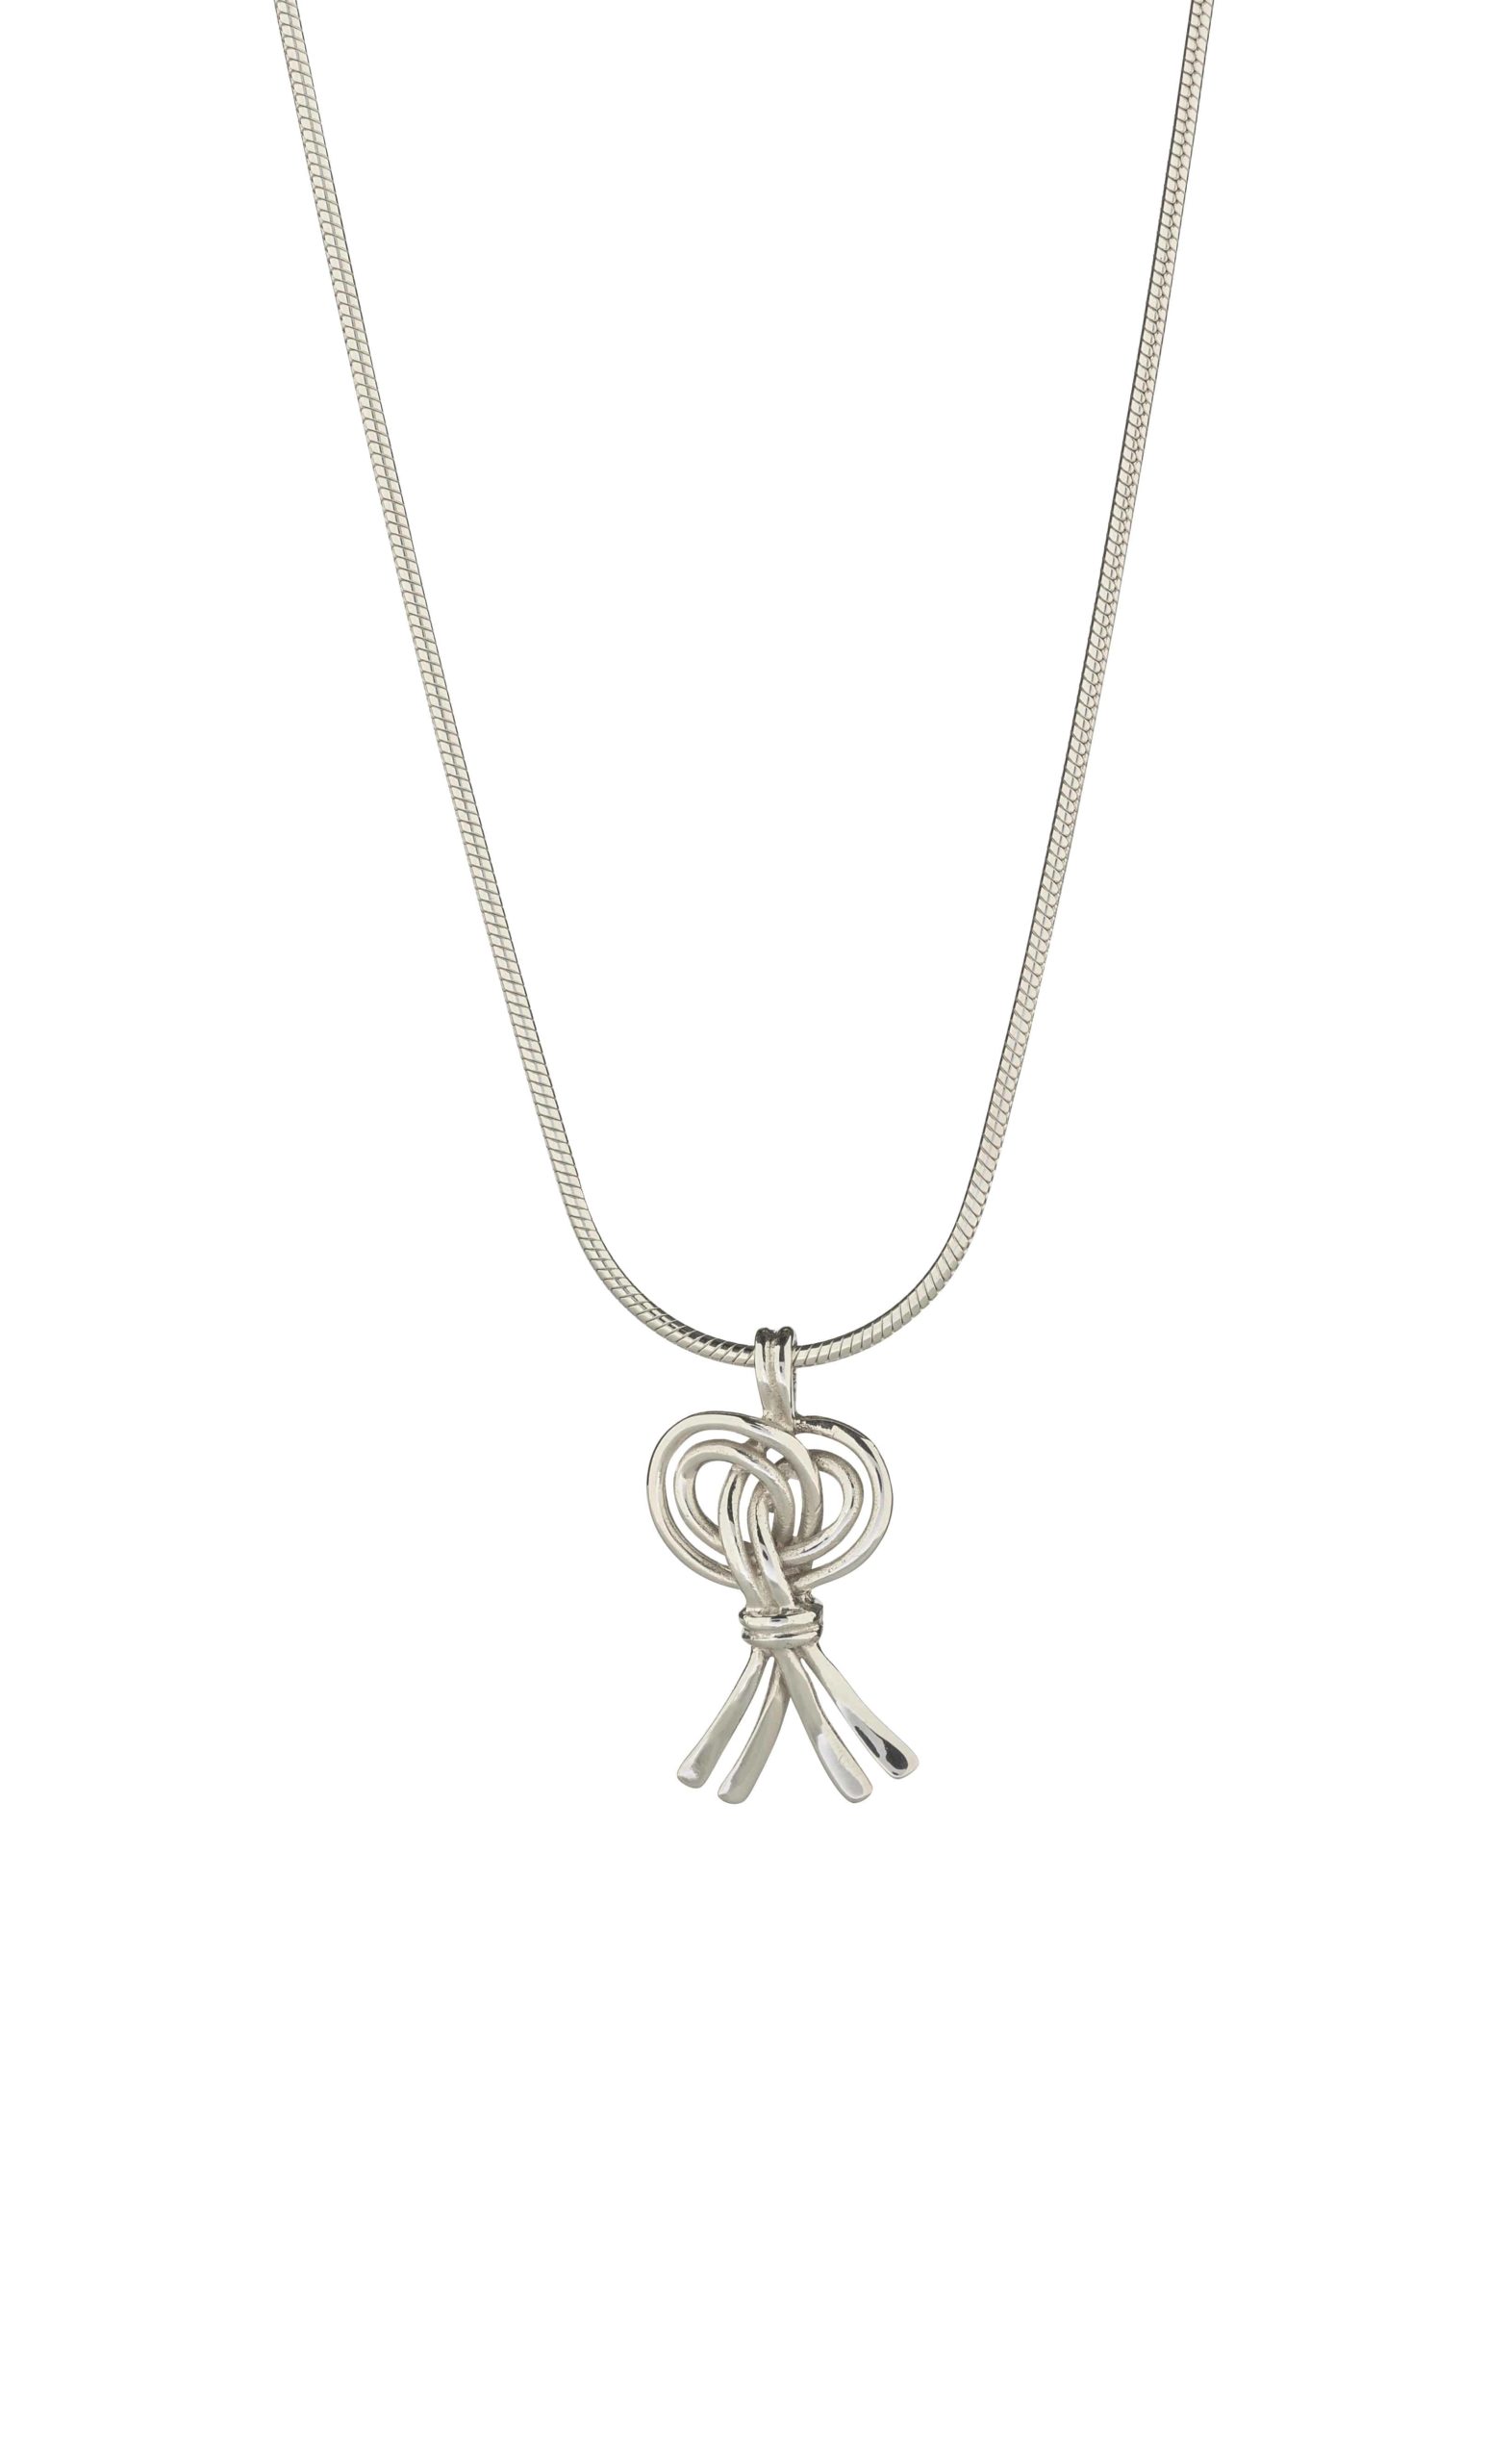 Product Harvest Knot Small Pendant and Chain Jewellery